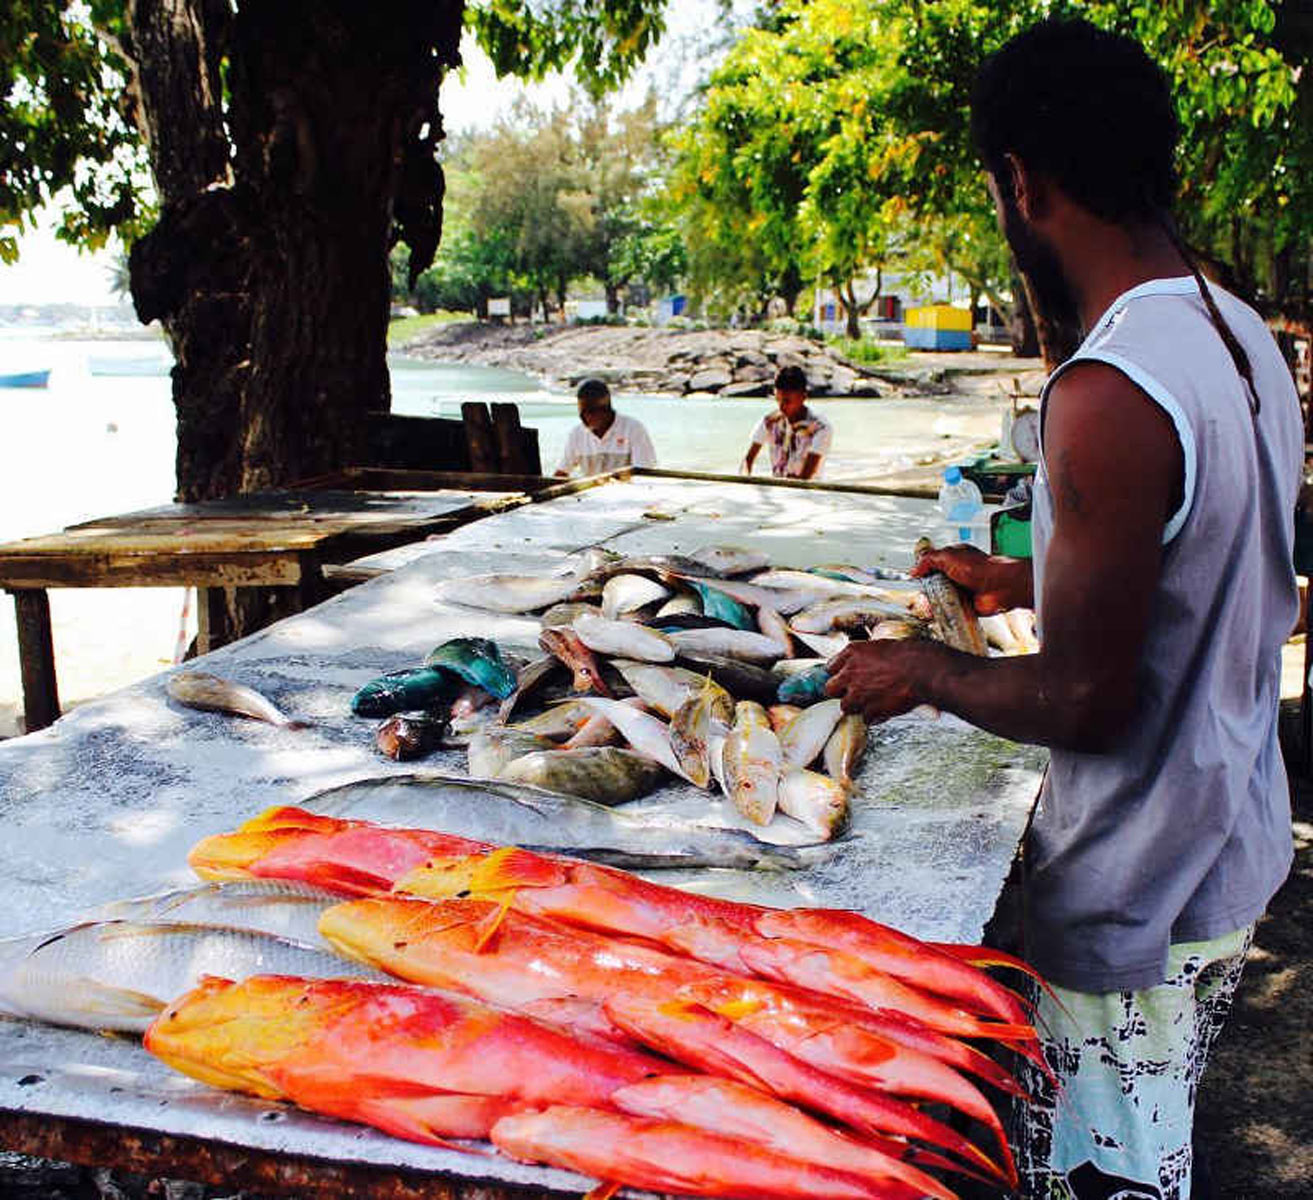 local fishermen on market sort the fish caught at night then ready to sell it in fresh local market